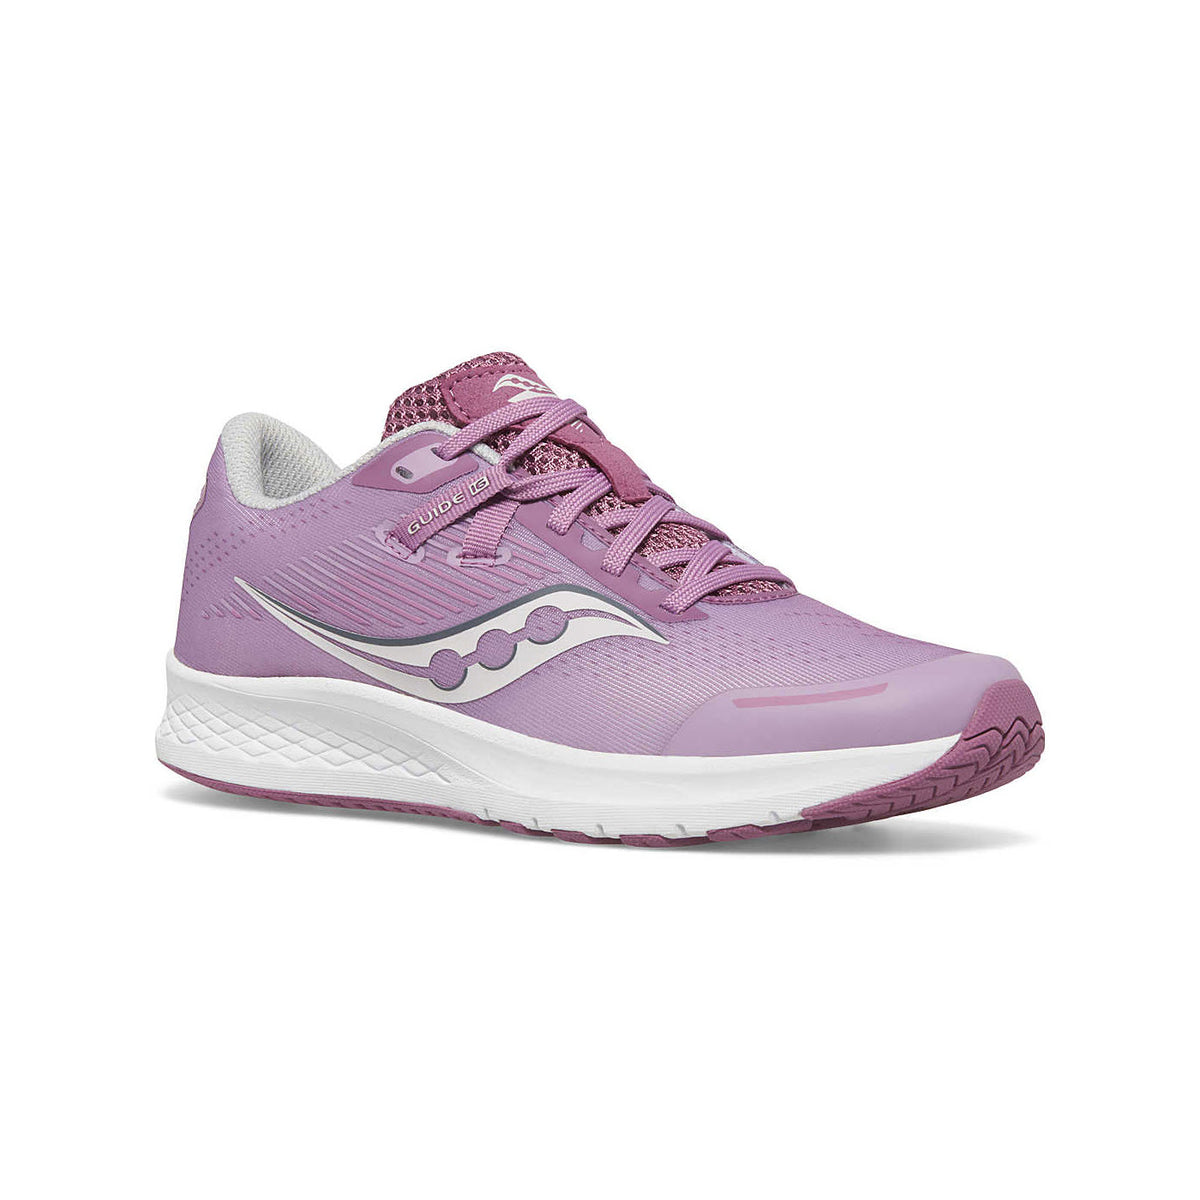 A single light purple Saucony Guide 16 Orchid performance runner with white soles and a distinctive wave pattern on the side.